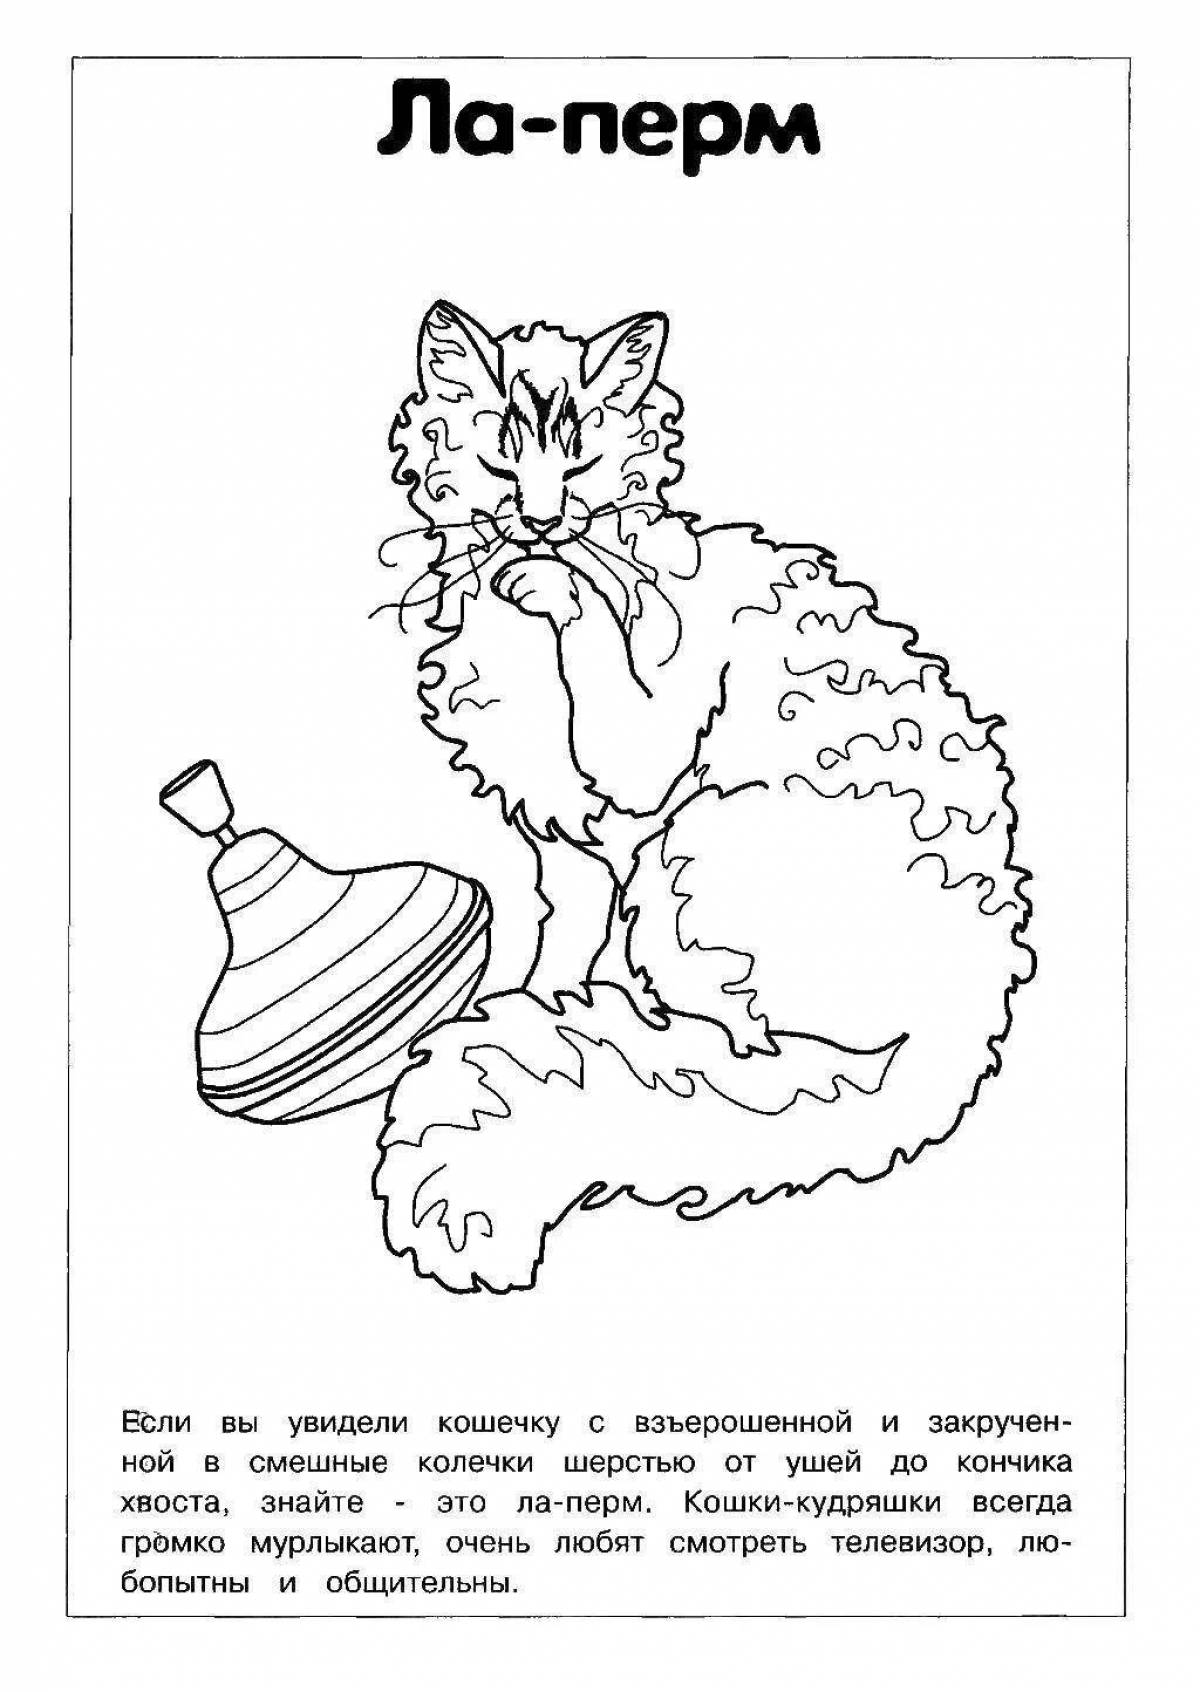 Amazing coloring pages of cat breeds with names